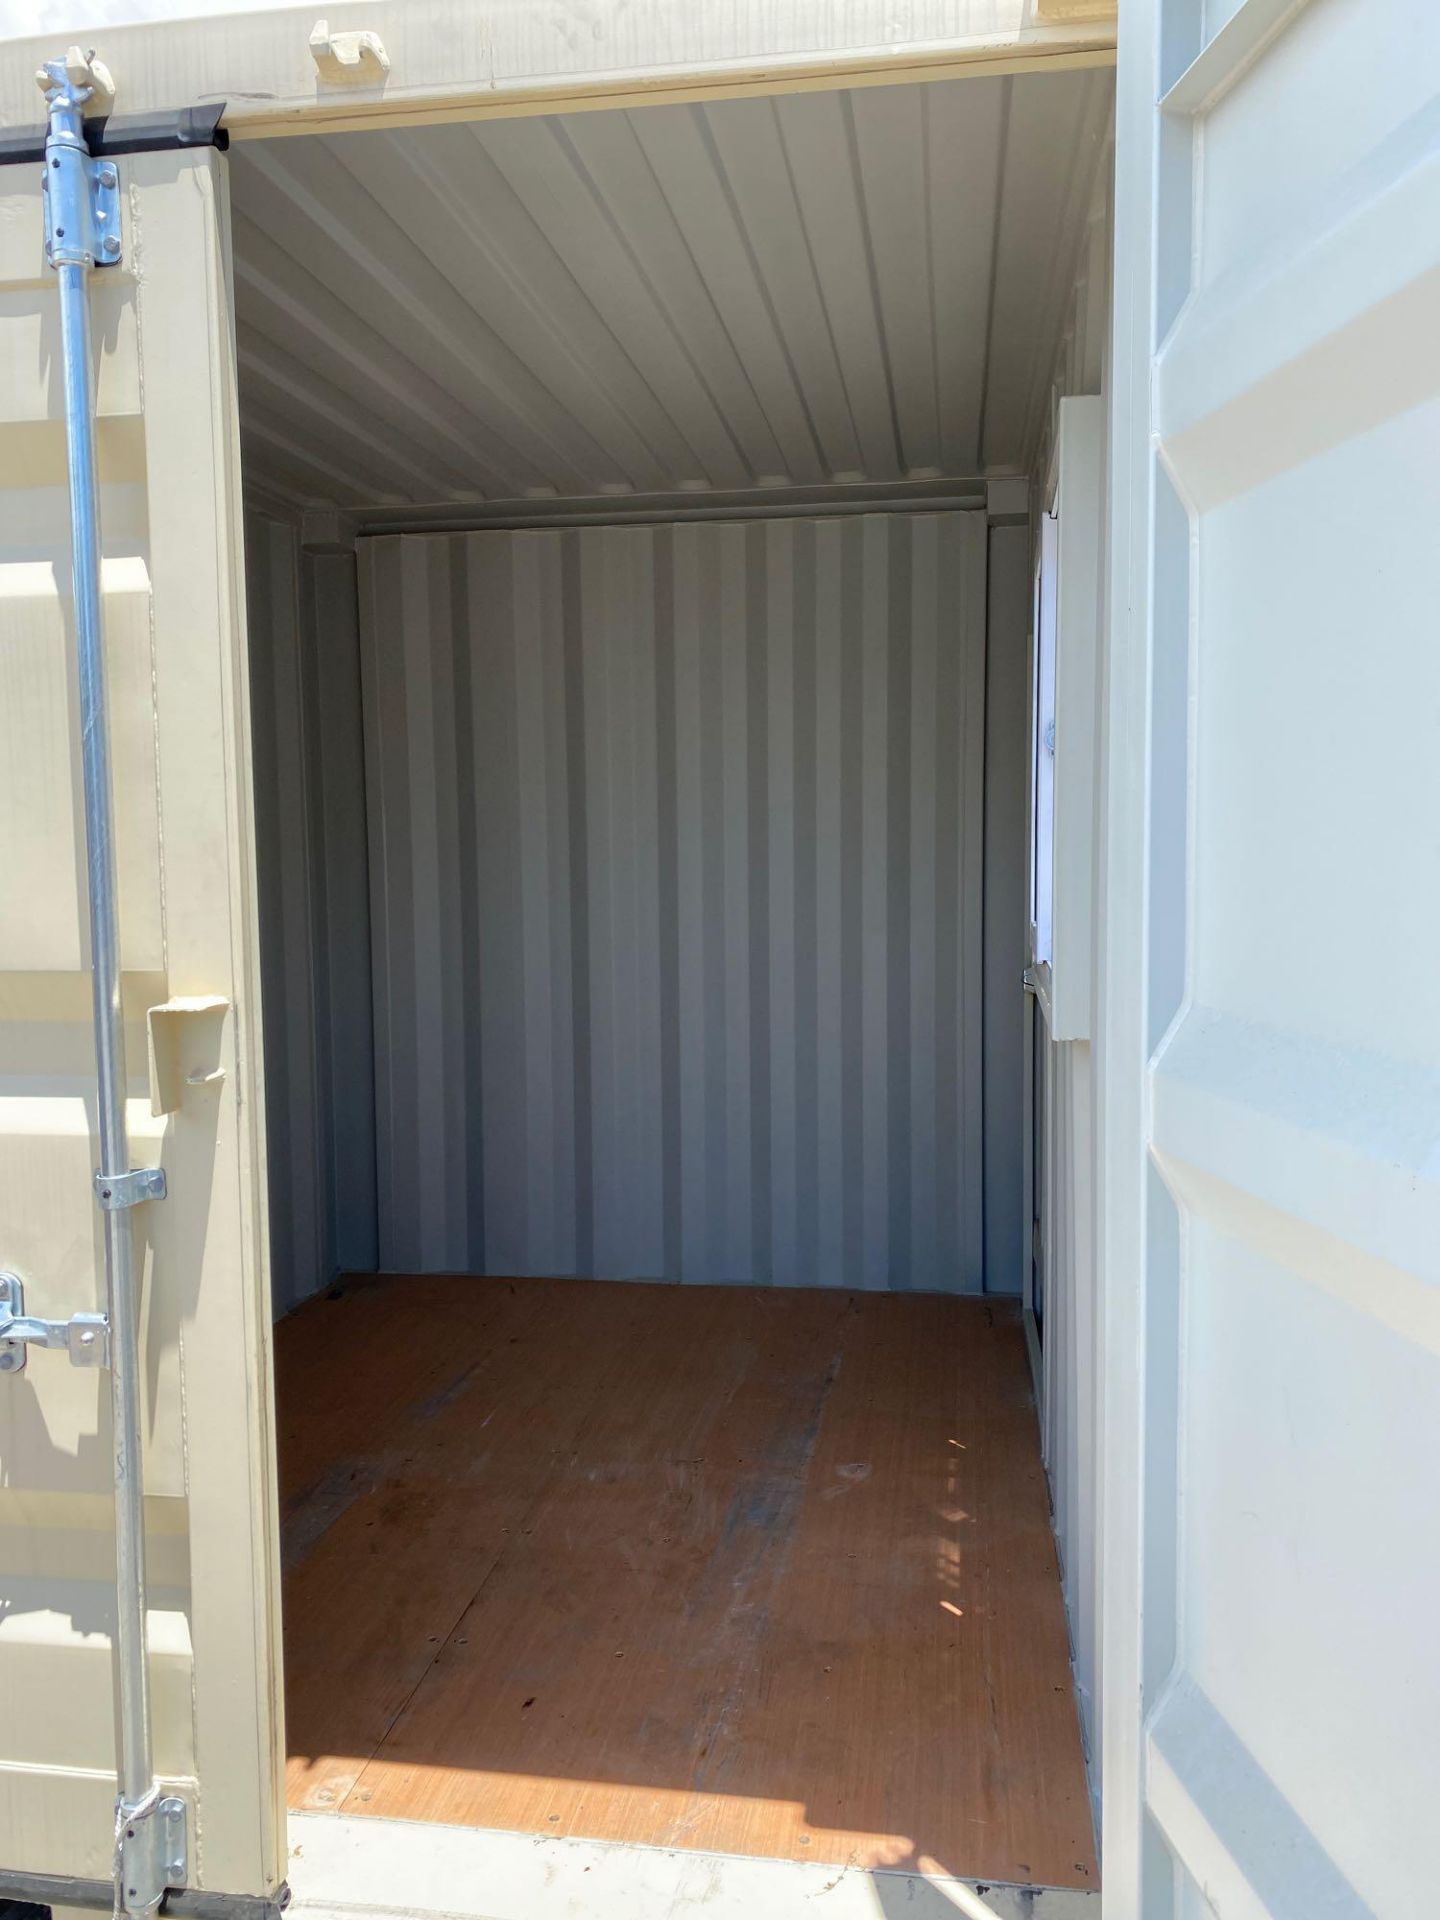 UNUSED 2020 PORTABLE OFFICE CONTAINER WITH WINDOW & SIDE DOOR. - Image 5 of 6